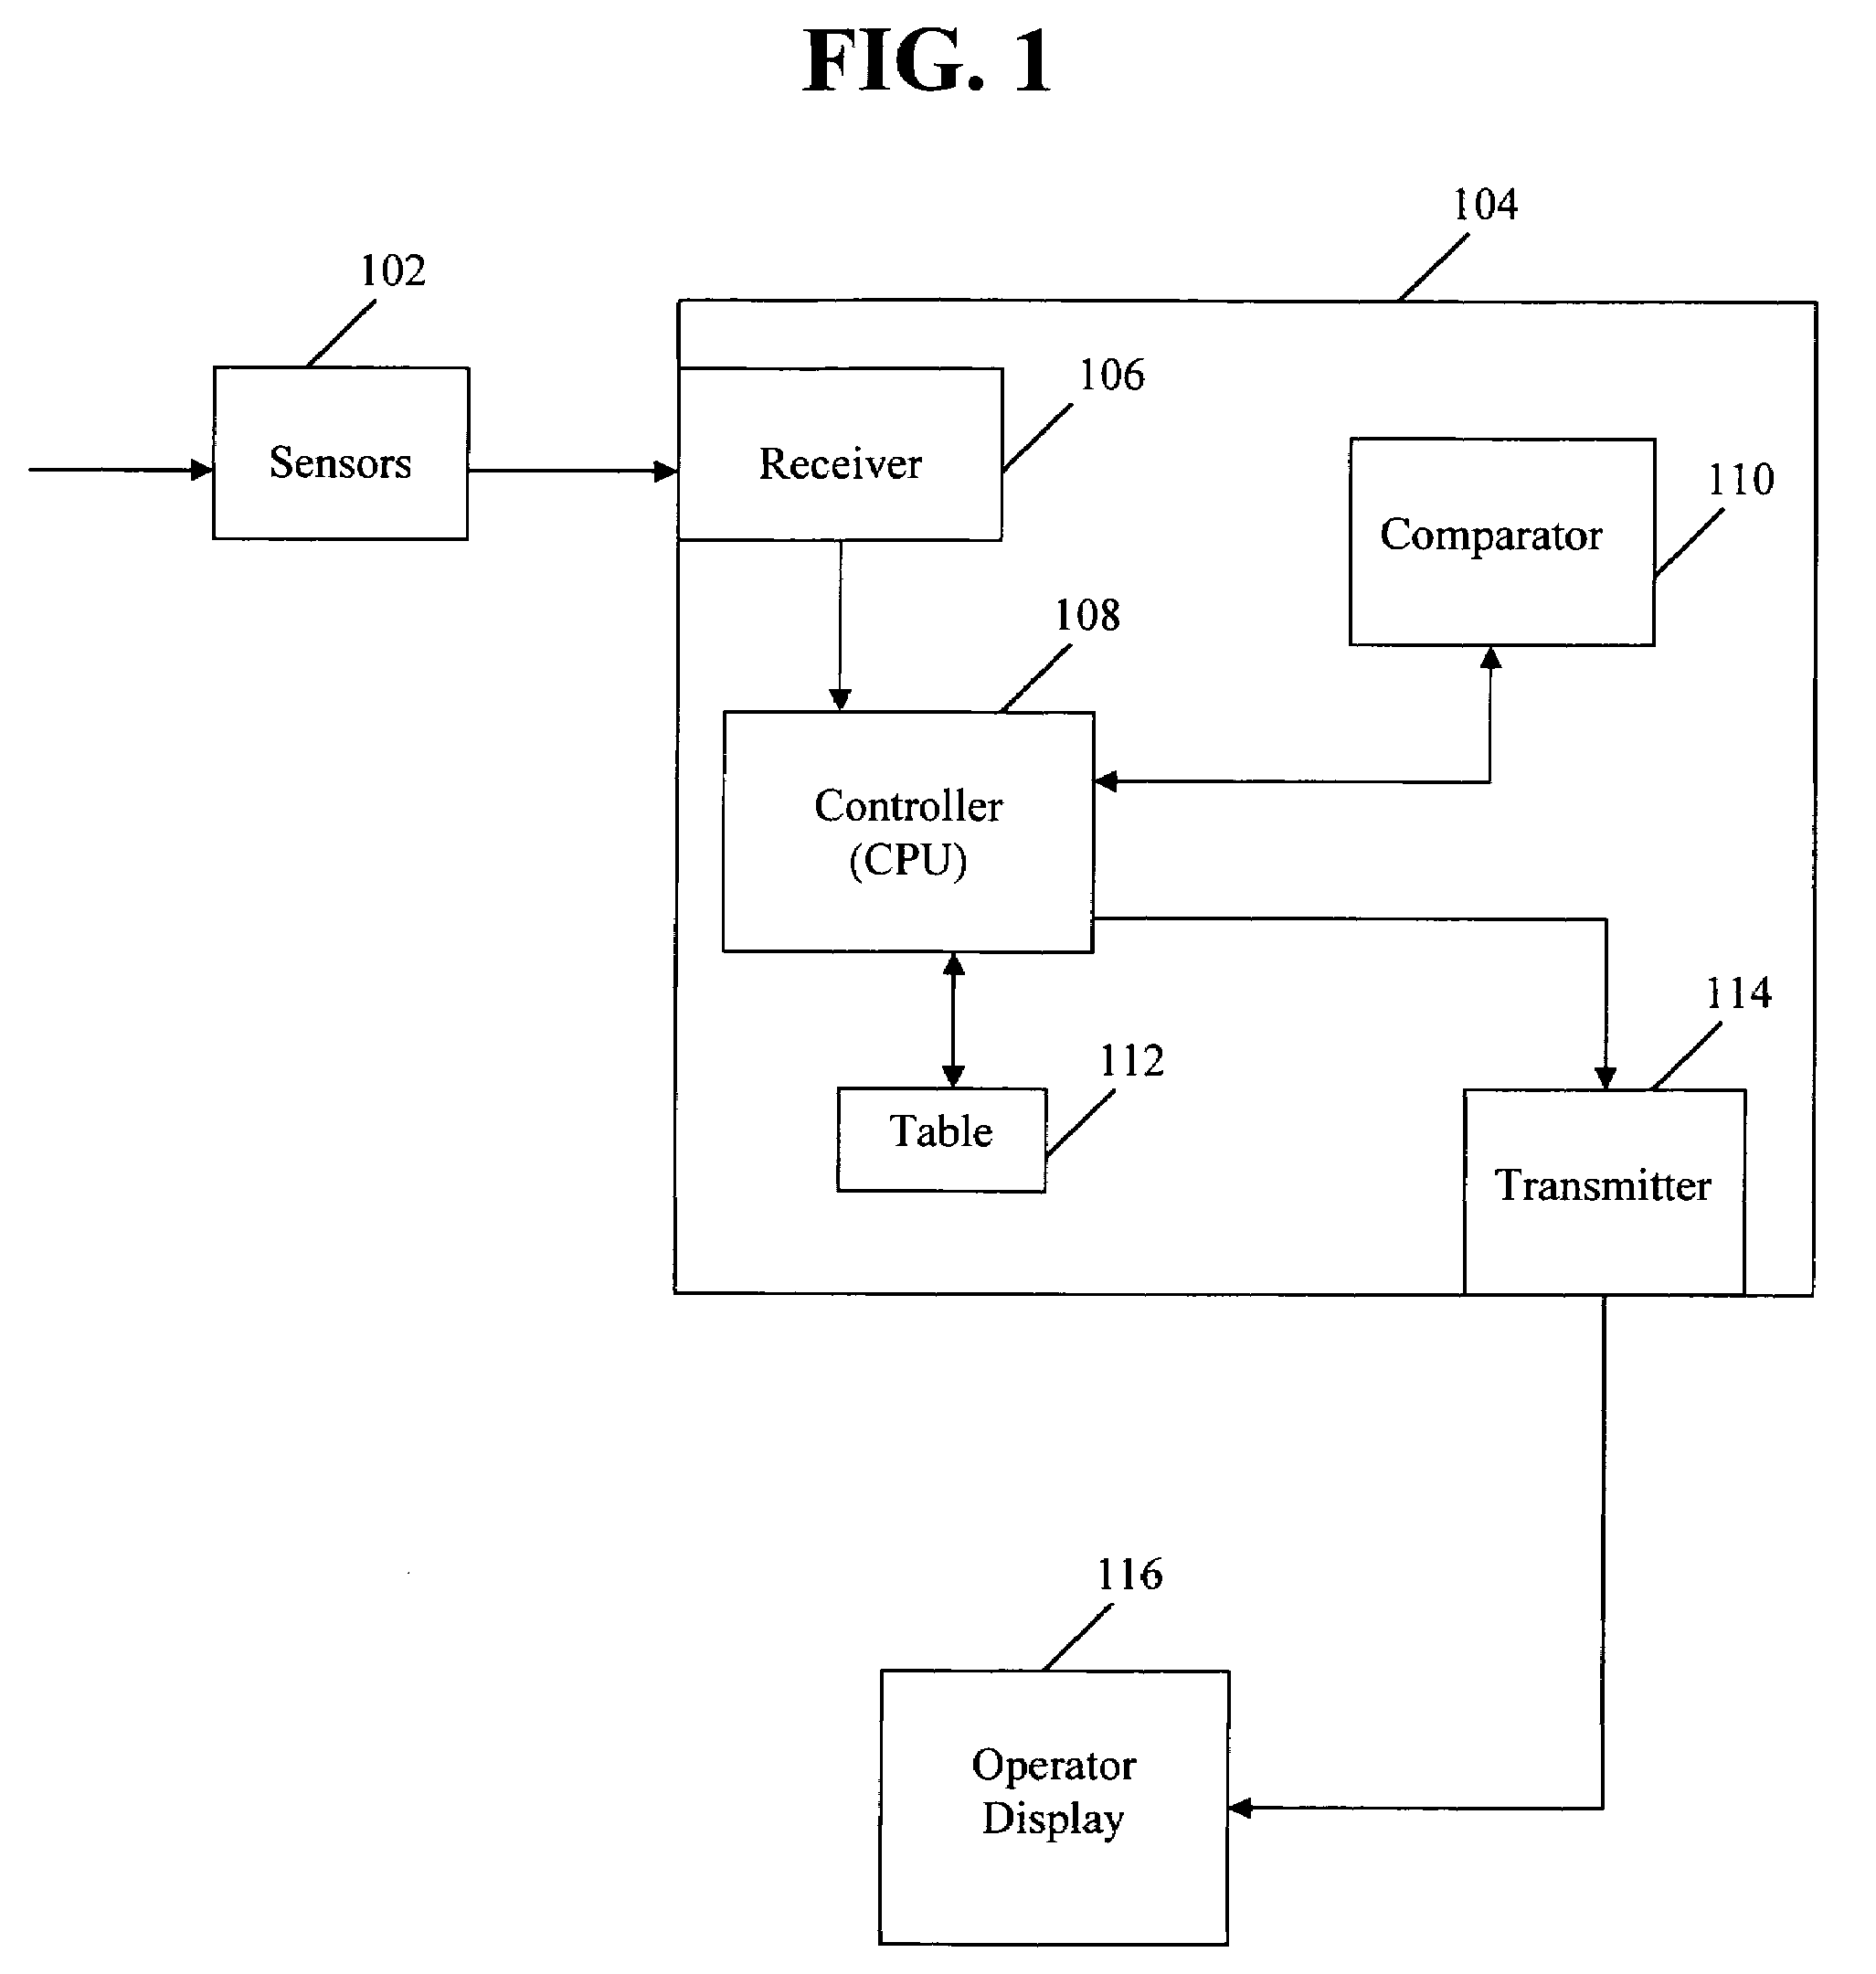 Operator alerting system using a vehicle fault condition prioritization method